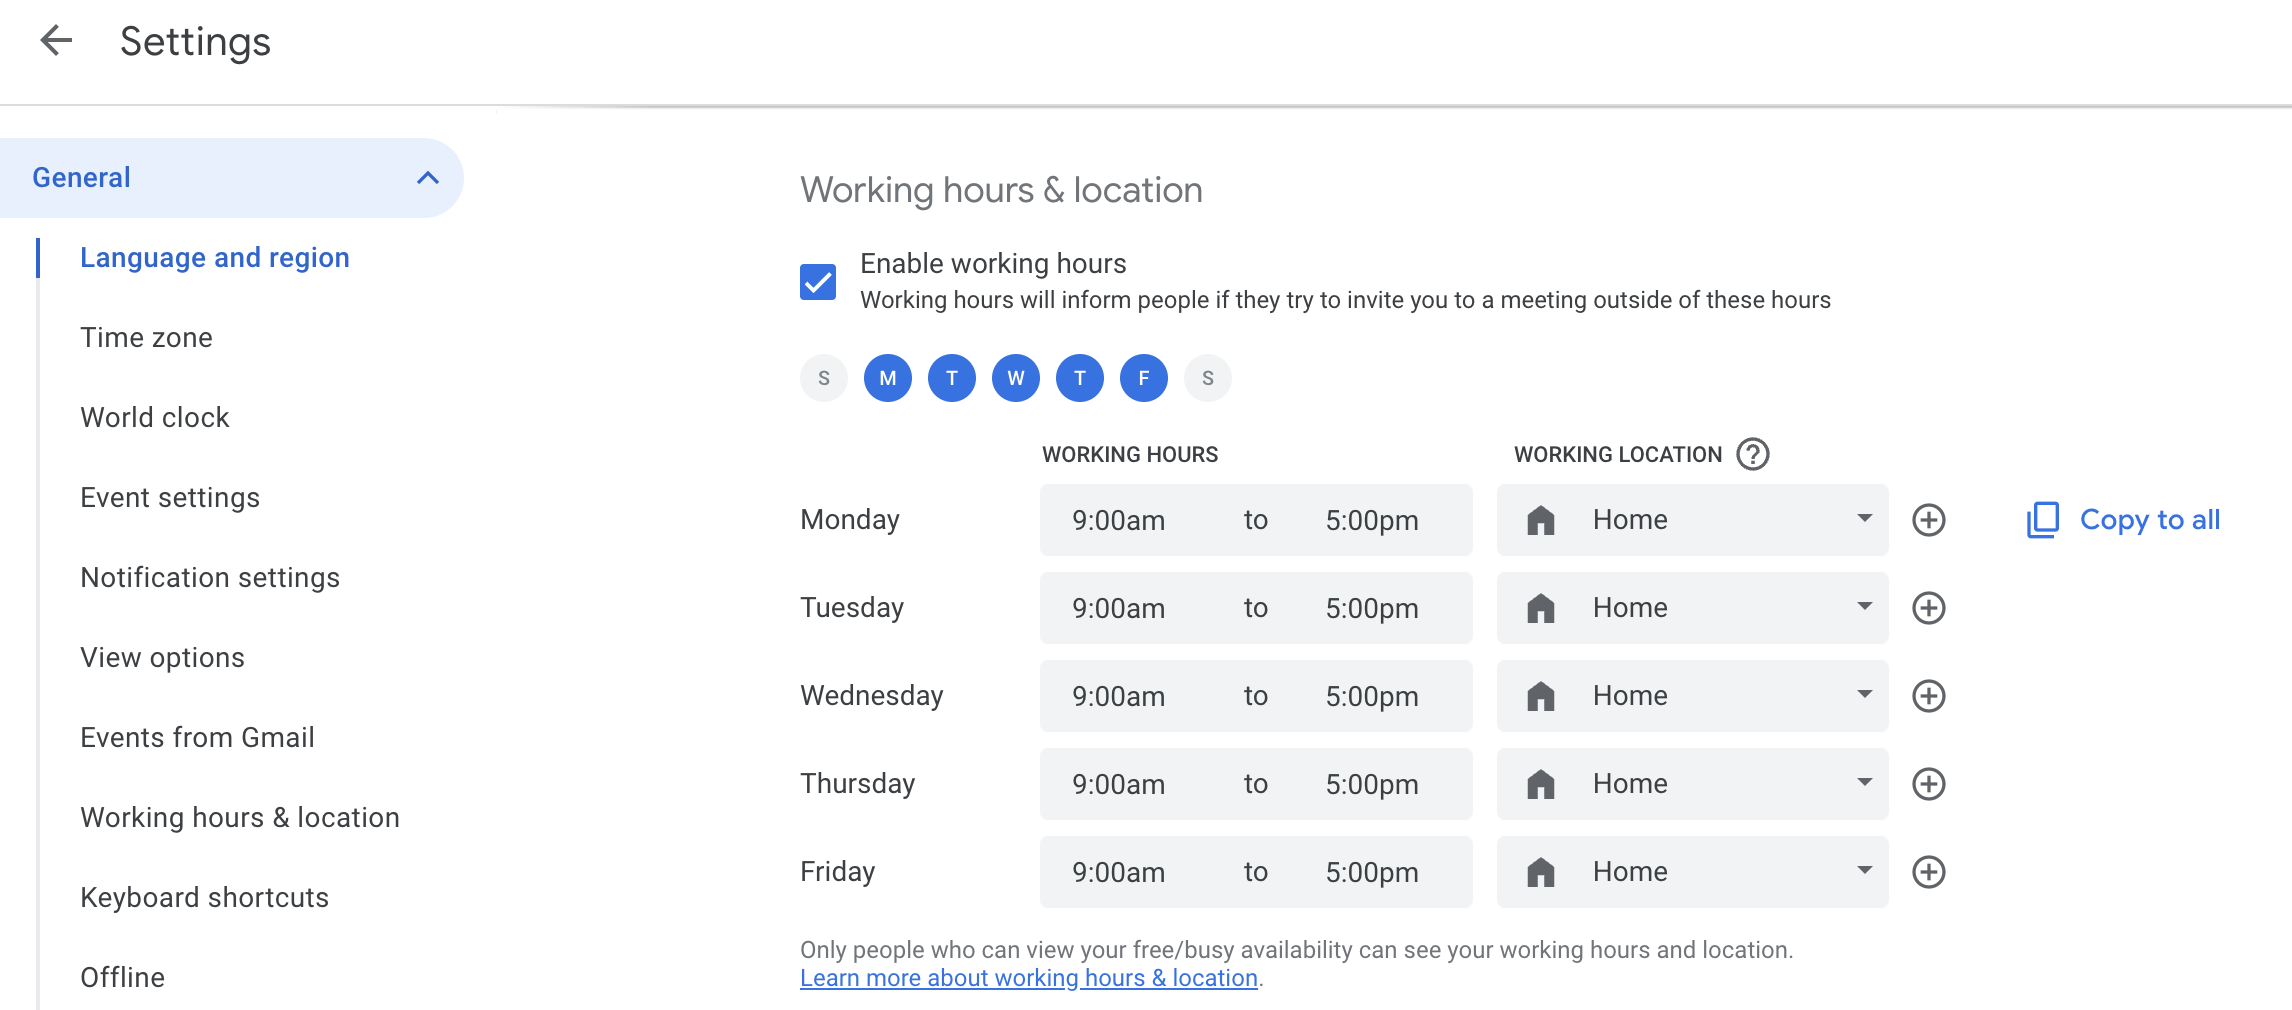 Screenshot of Google Calendar settings page showing Working hours and